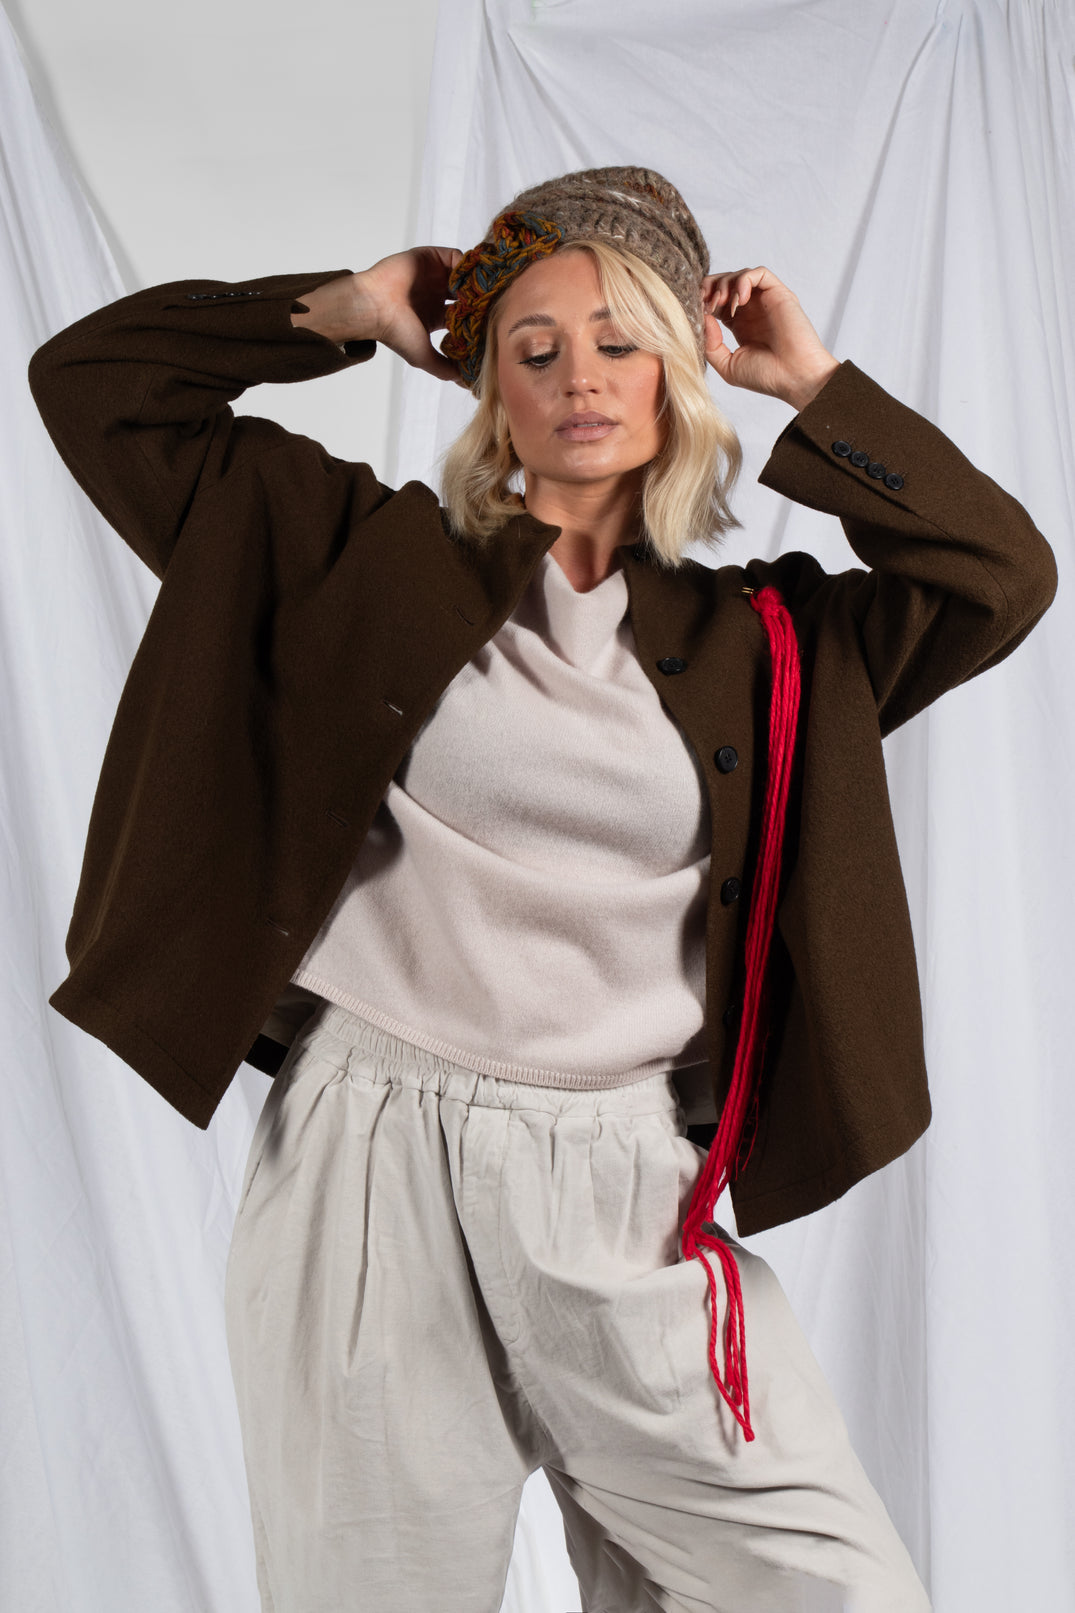 High Neck Jacket with Contrast Lining in Khaki